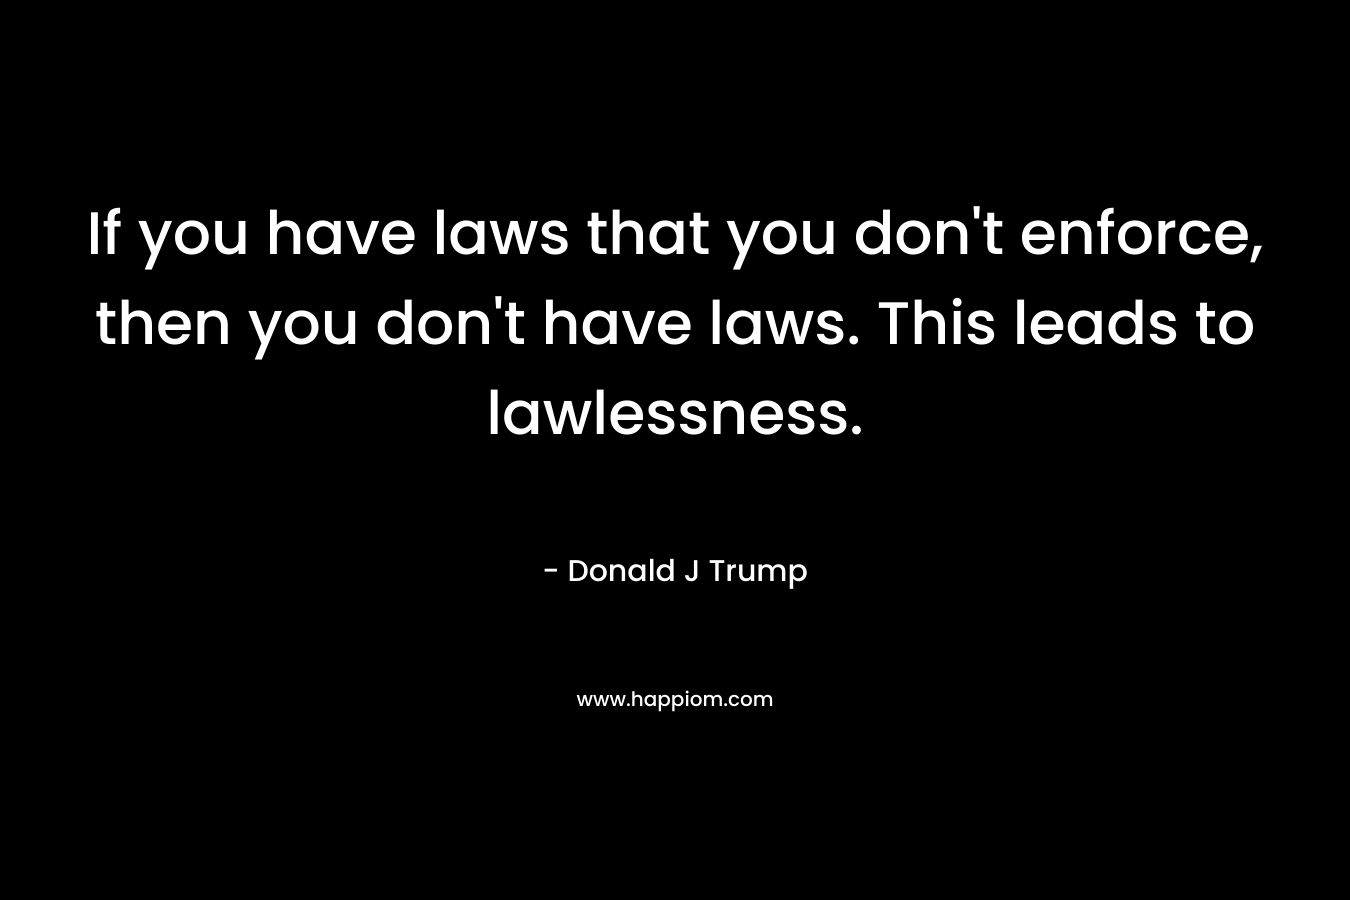 If you have laws that you don’t enforce, then you don’t have laws. This leads to lawlessness. – Donald J Trump